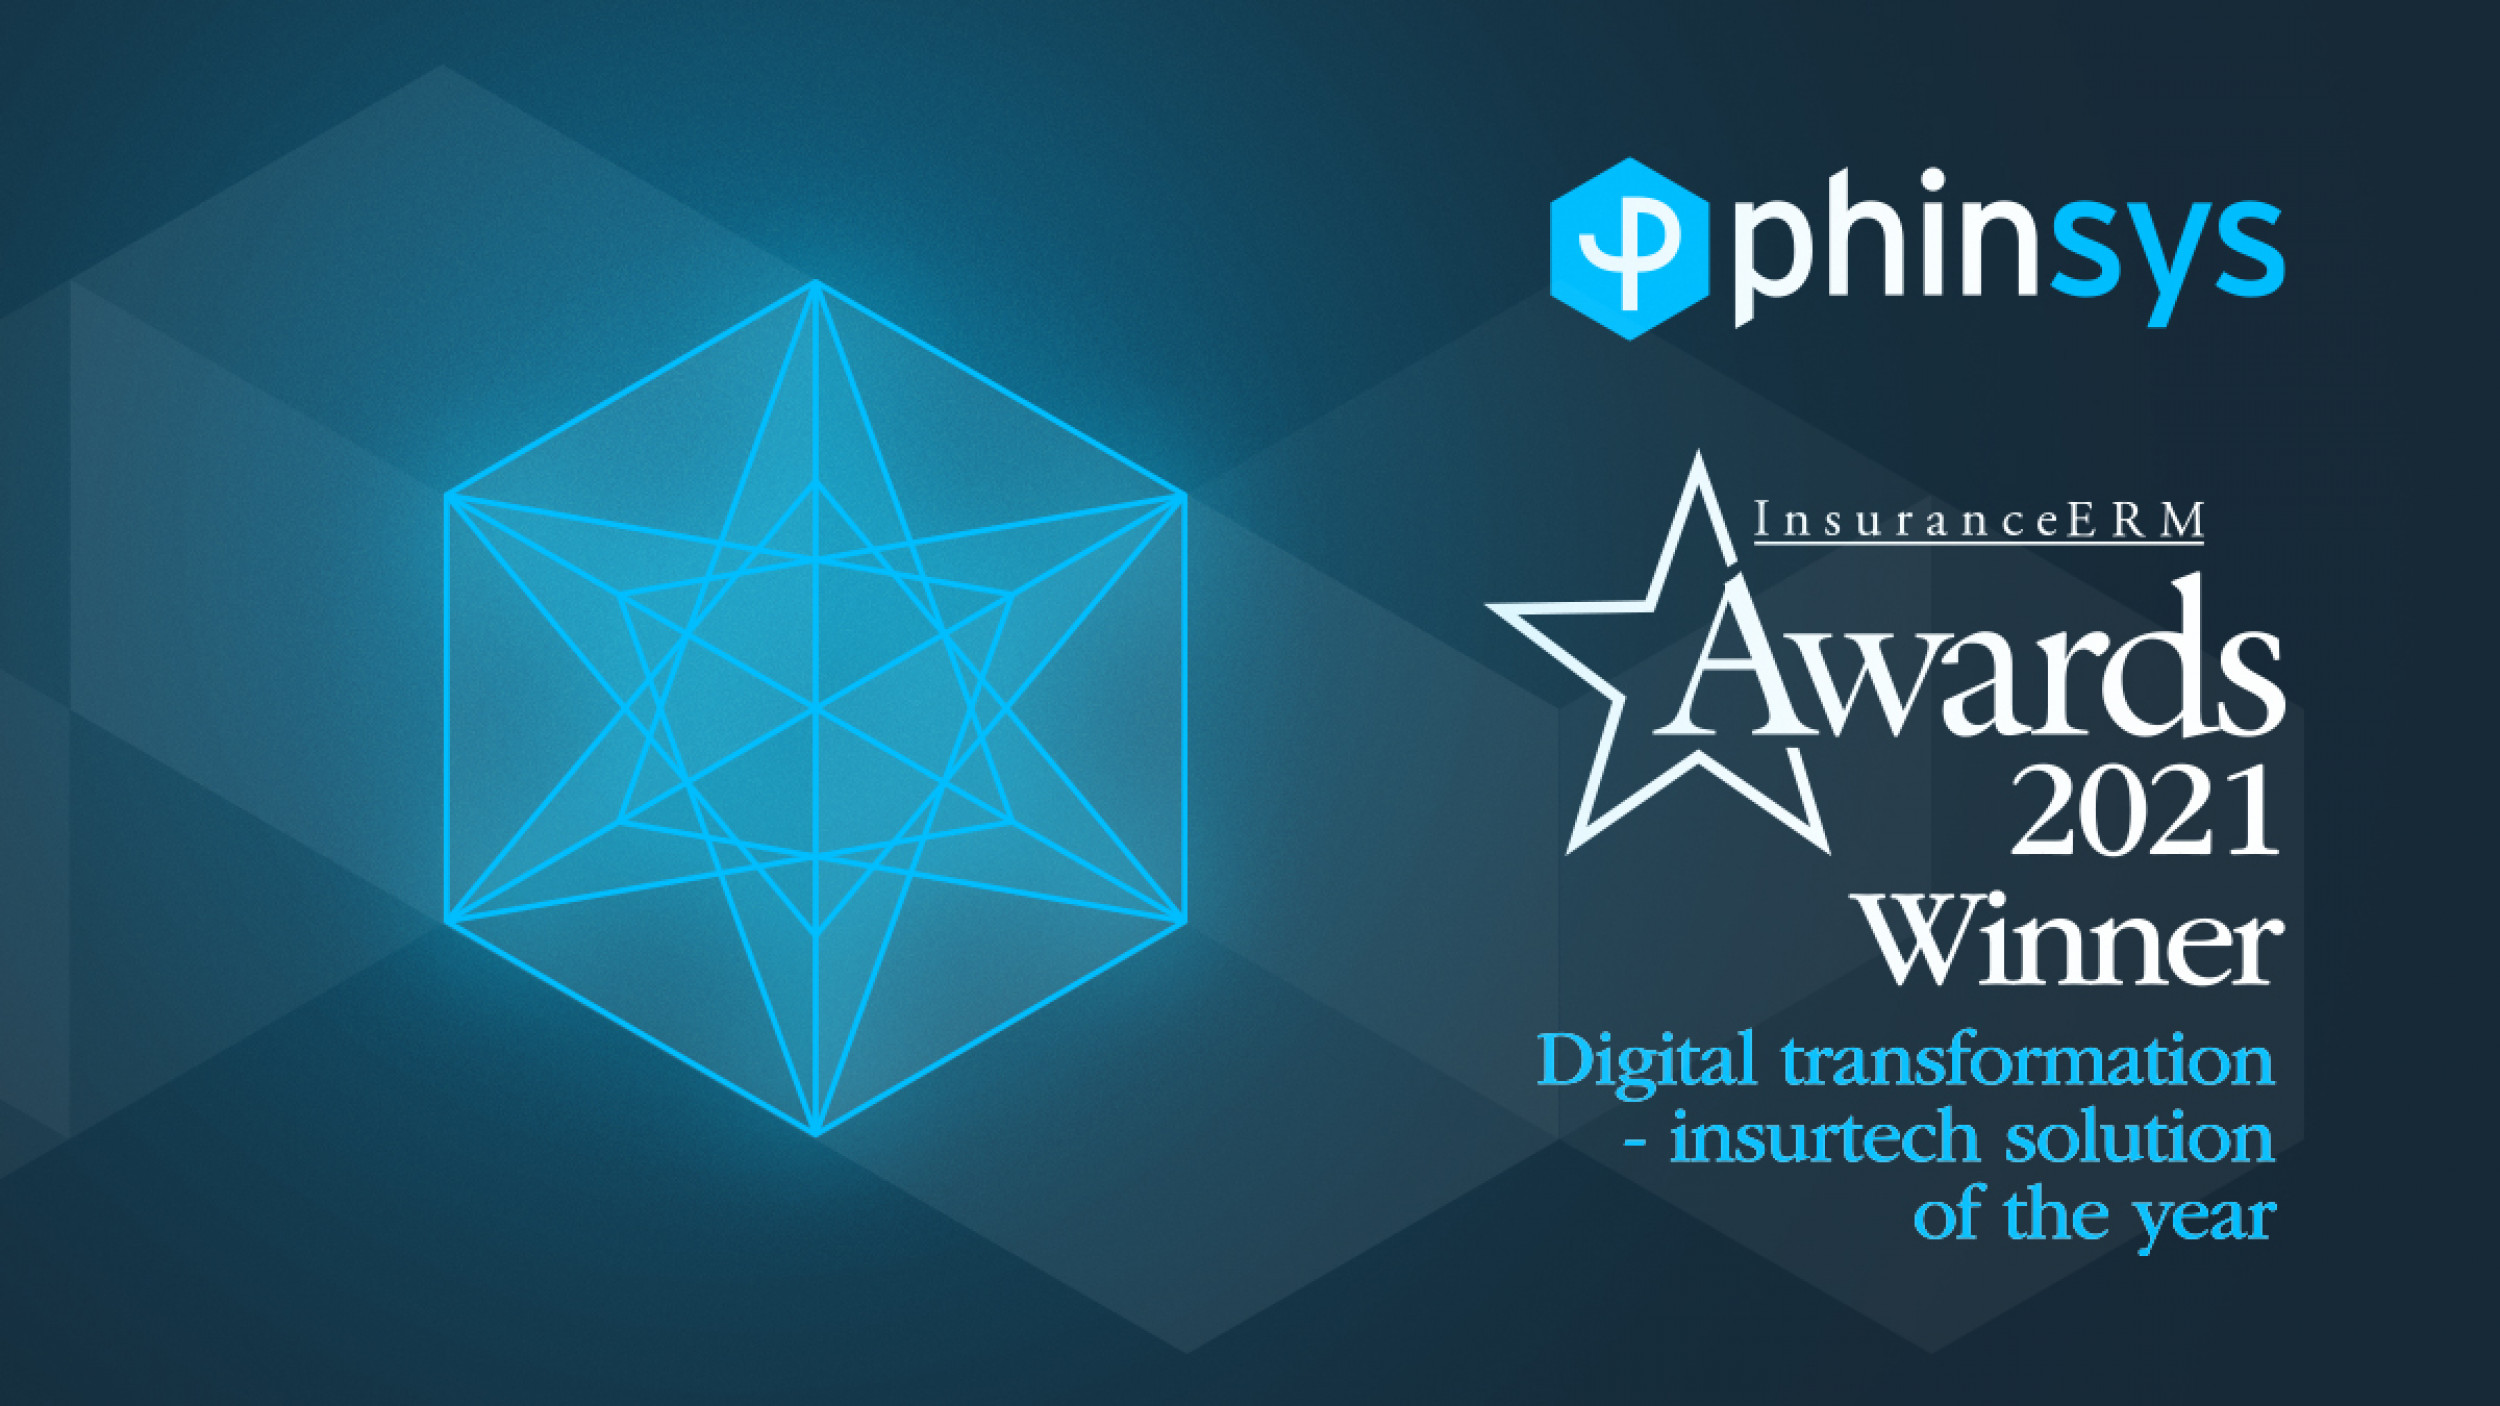 Phinsys awarded 'Insurtech Solution of the Year'